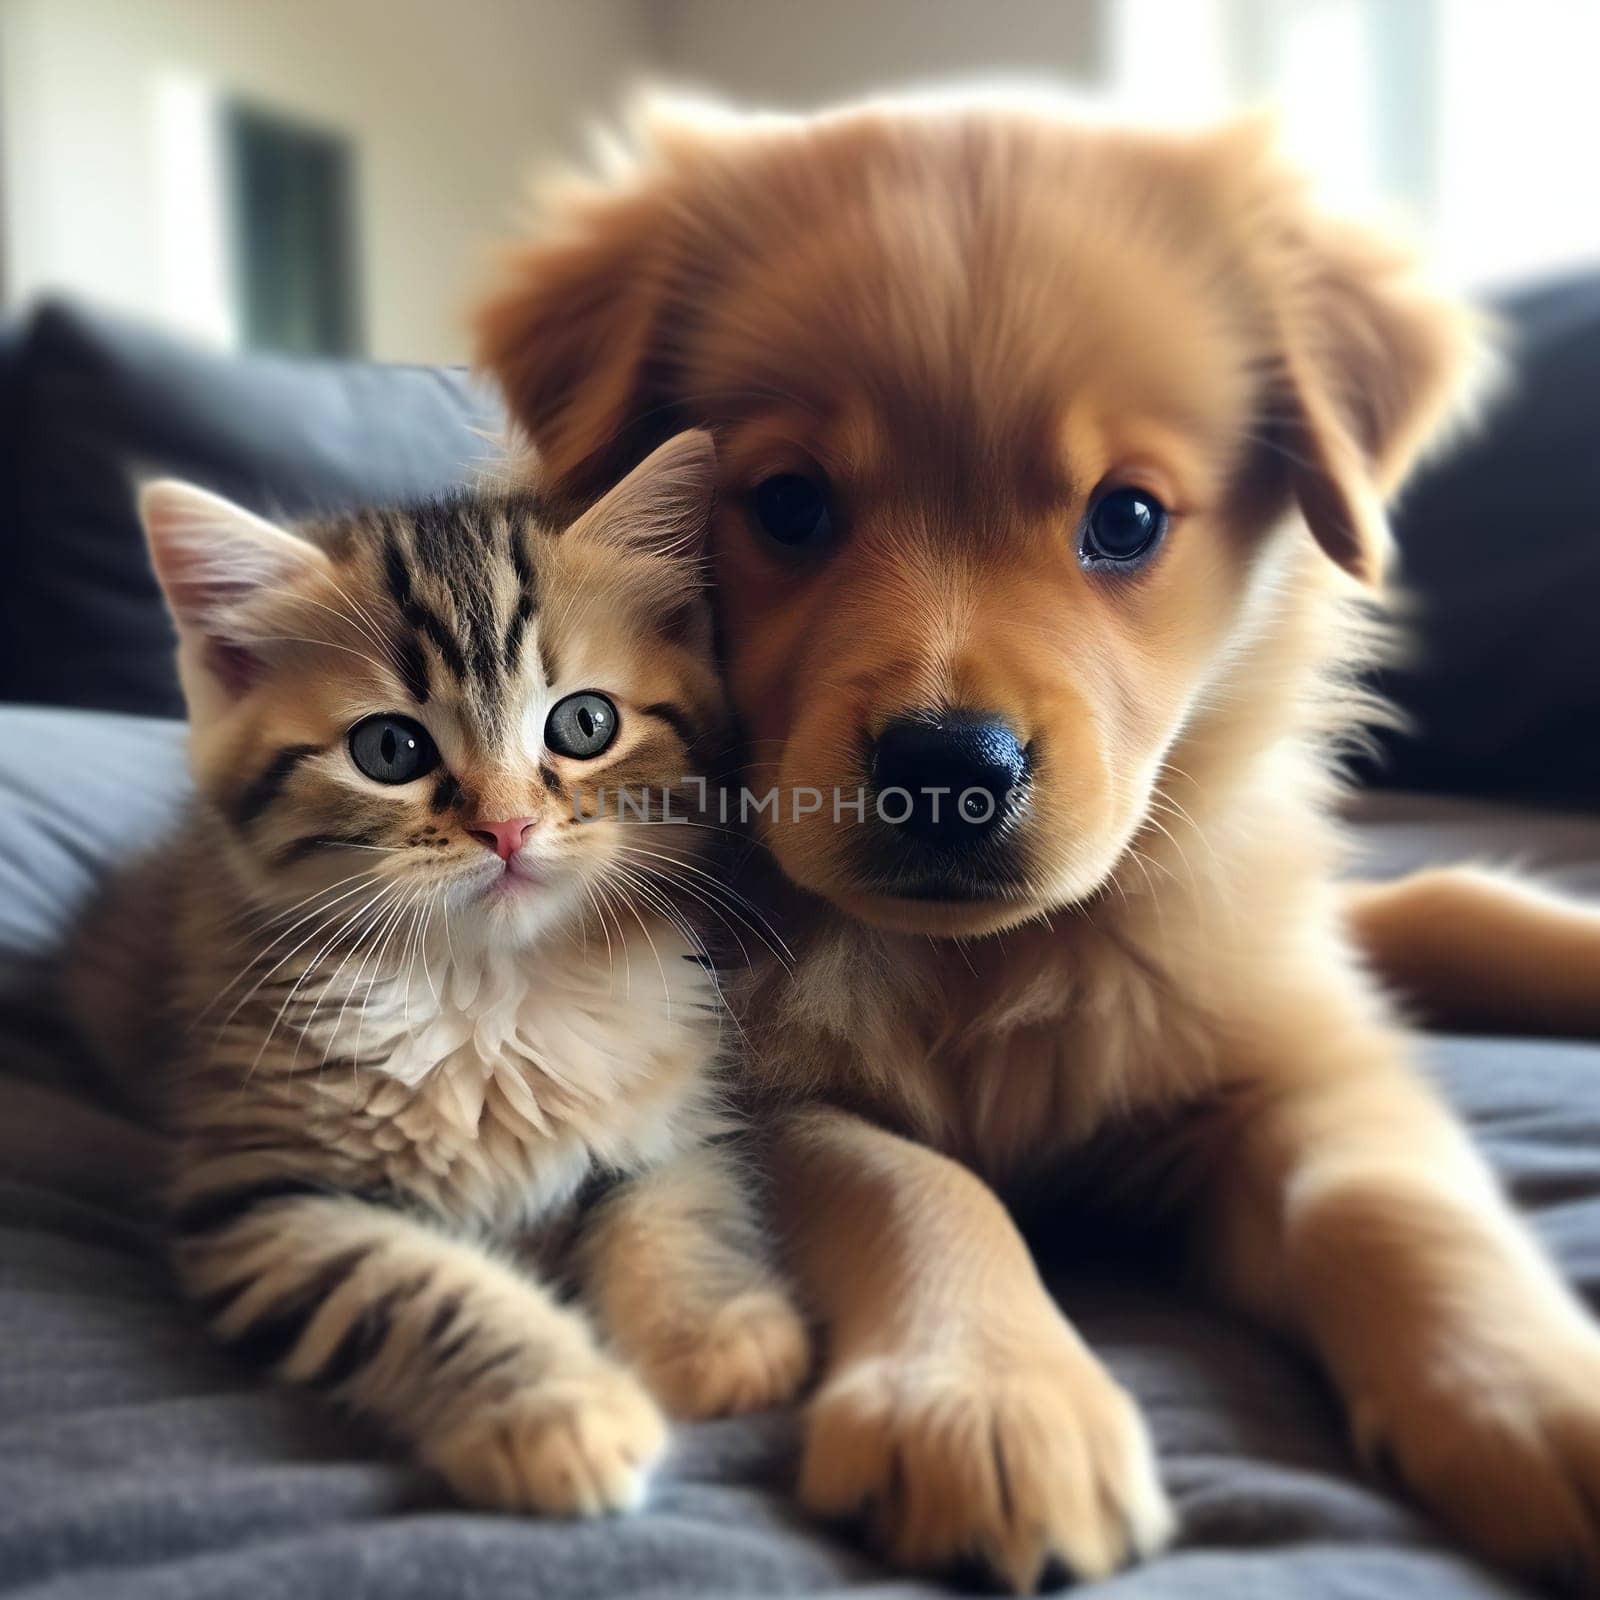 Best friends - kitten and small fluffy dog looking on camera